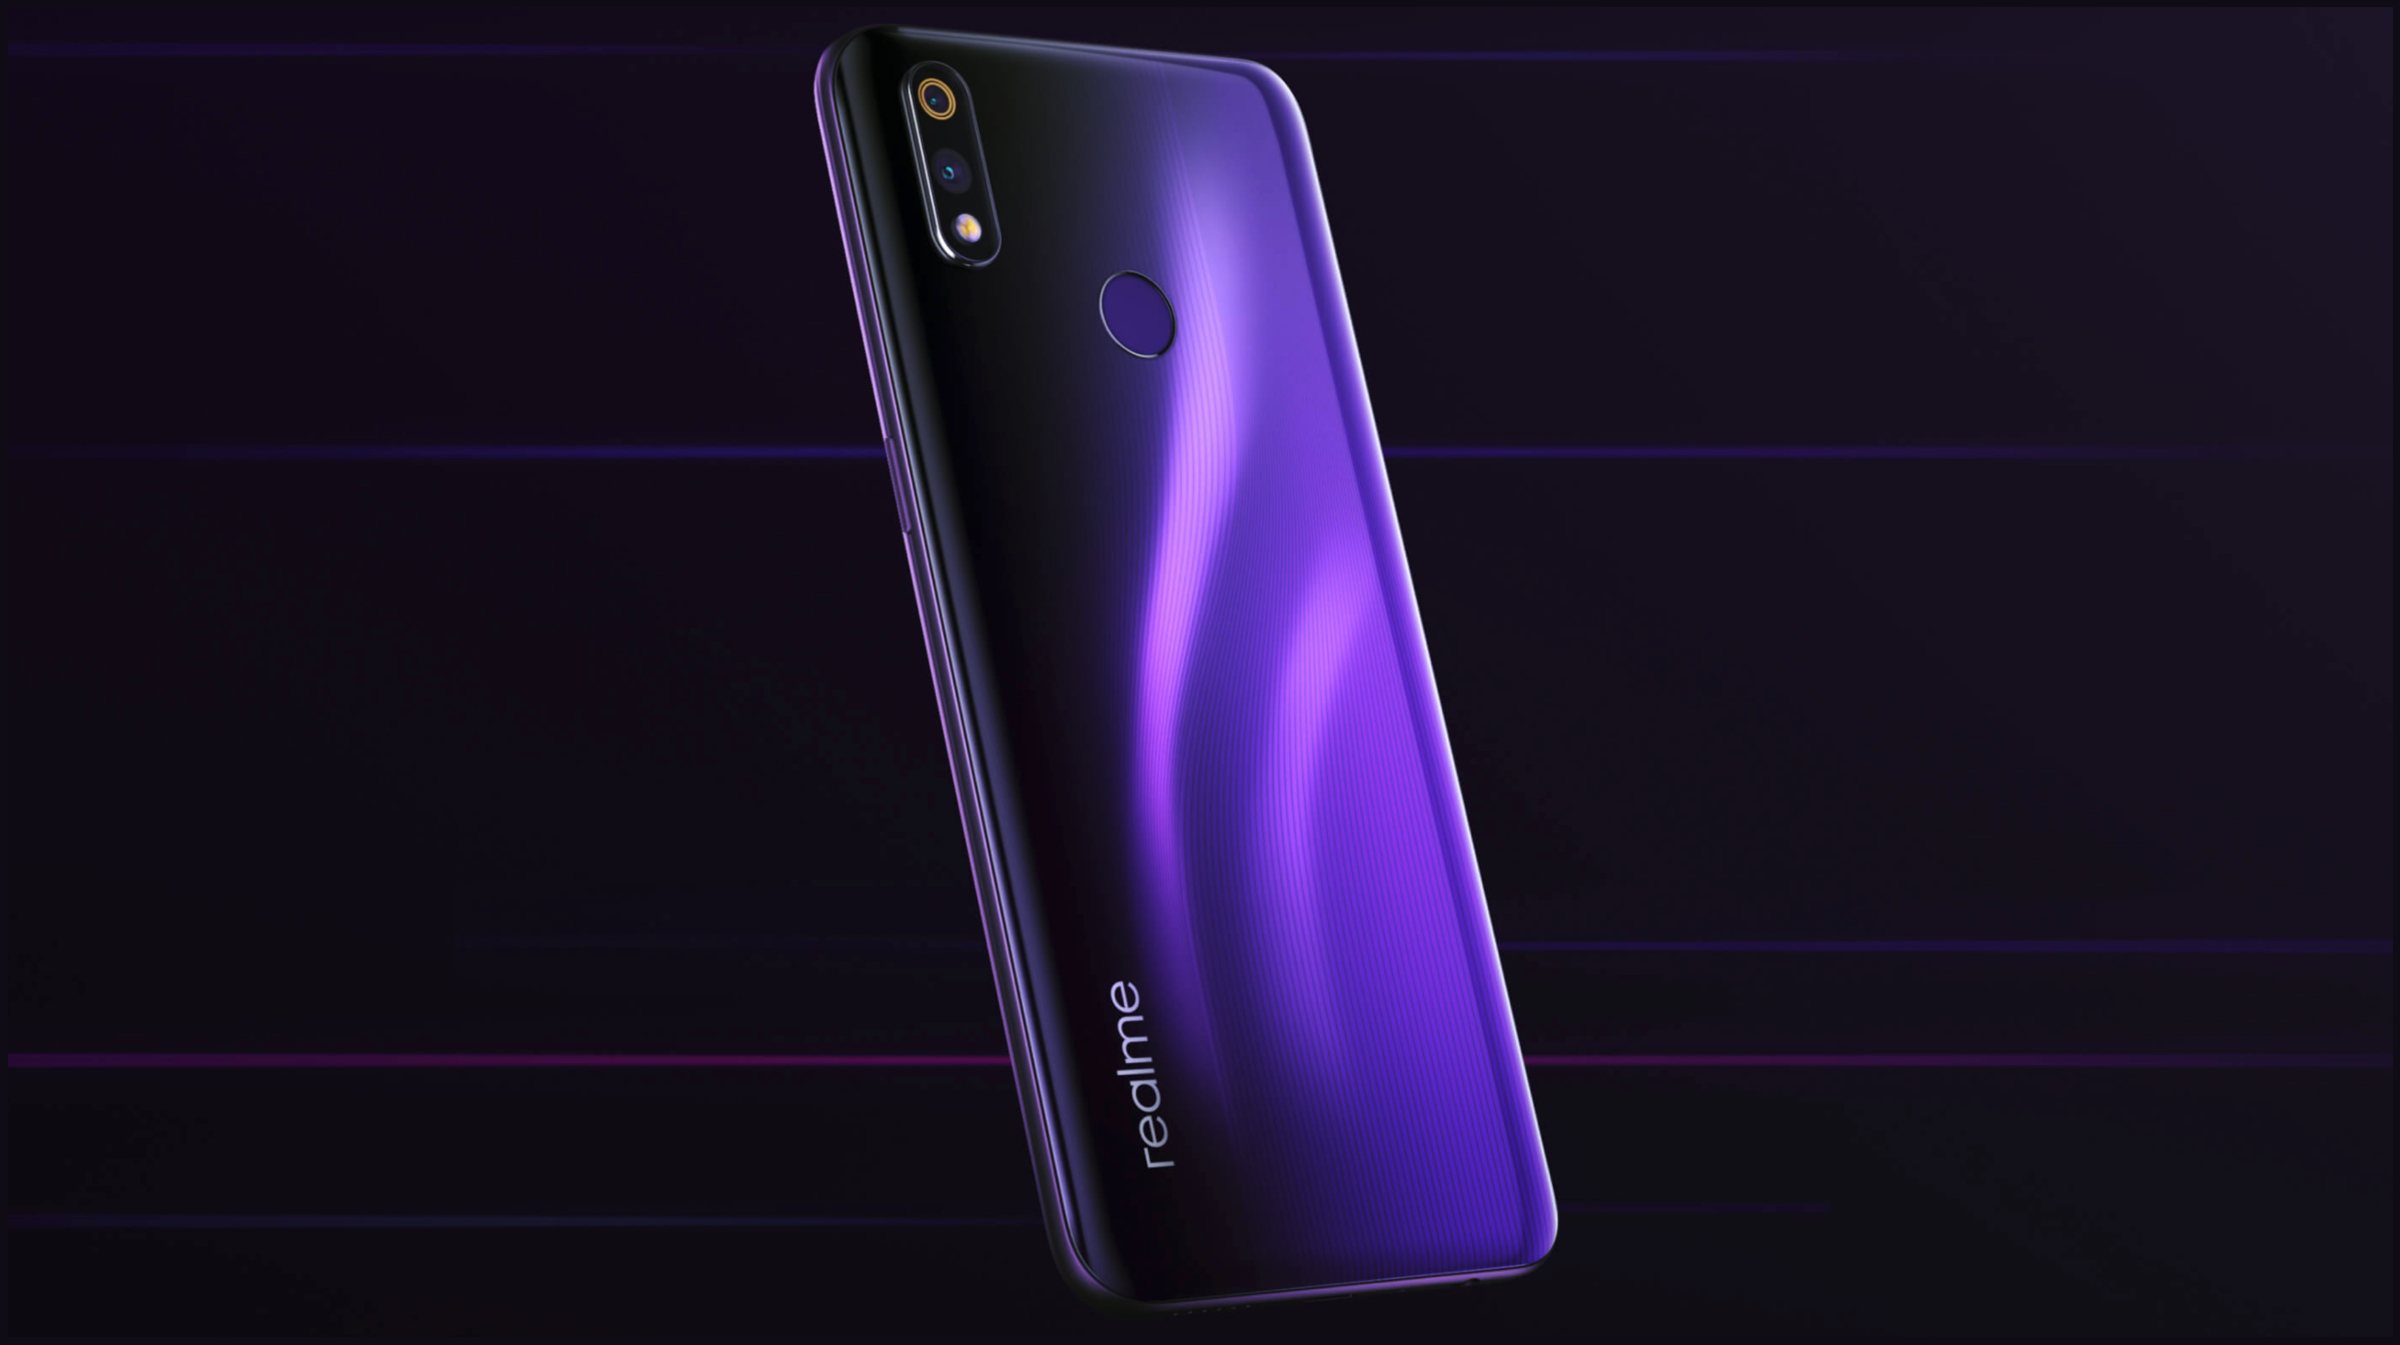 Realme 3 Pro First Sale In India Today, Price, Specs